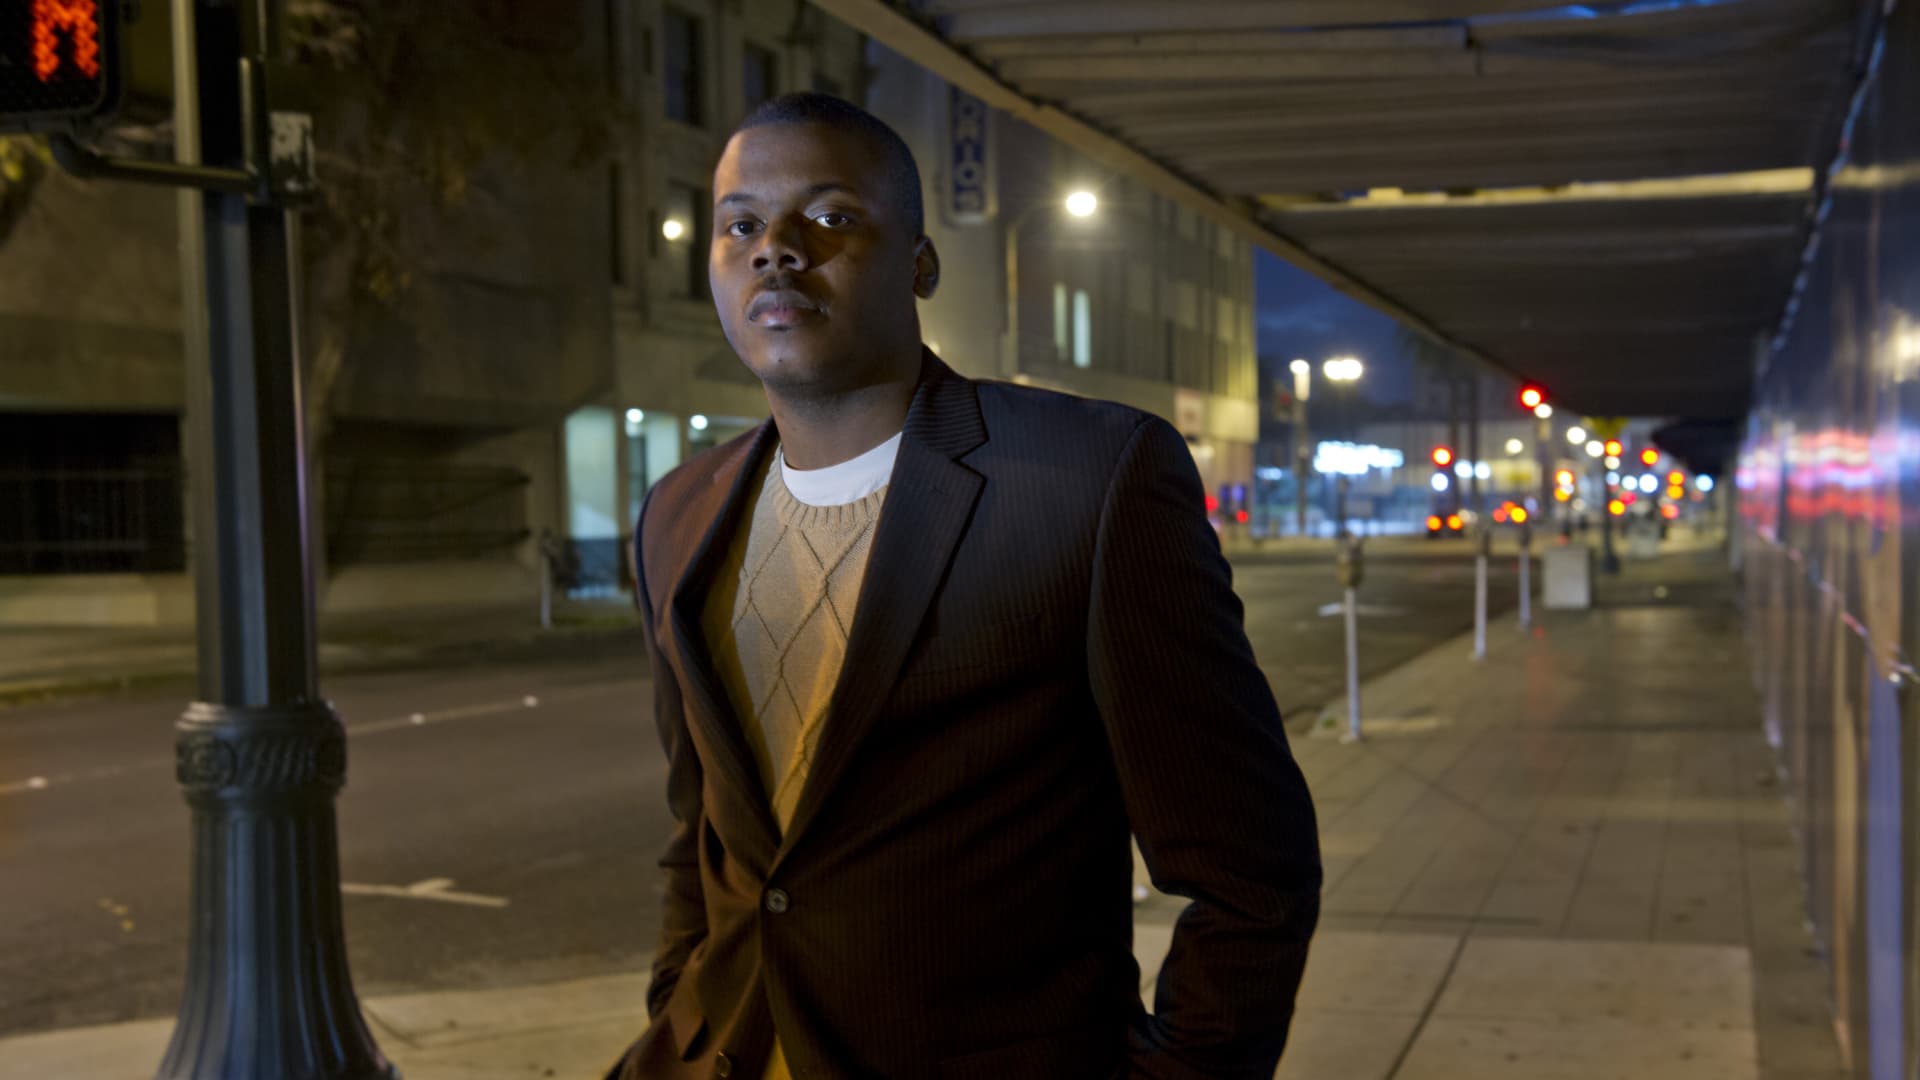 Michael Tubbs, pictured here as a 22-year-old Stanford University graduate, worked to change his hometown of Stockton, California as a city council member and then as mayor.